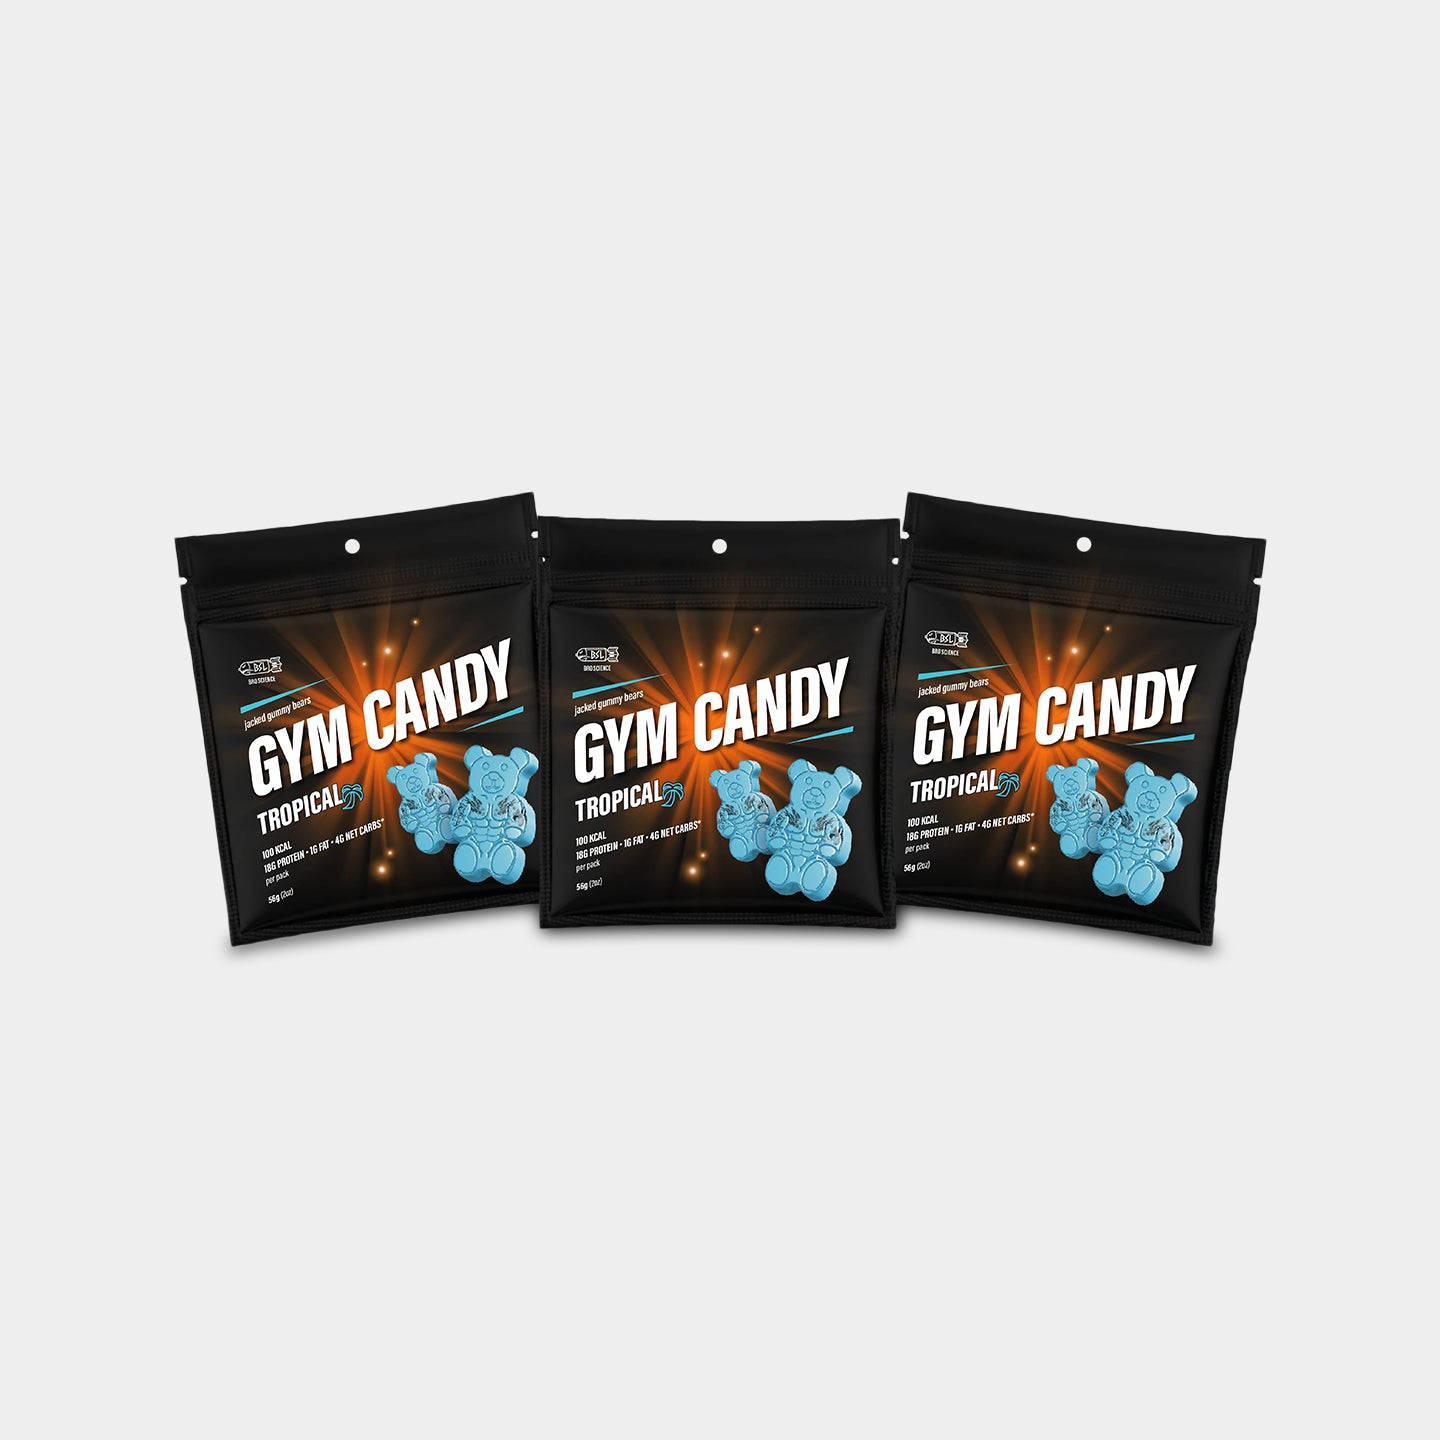 Gym Candy Jacked Gummy Bears, Tropical, 2oz - 9 Pack A1